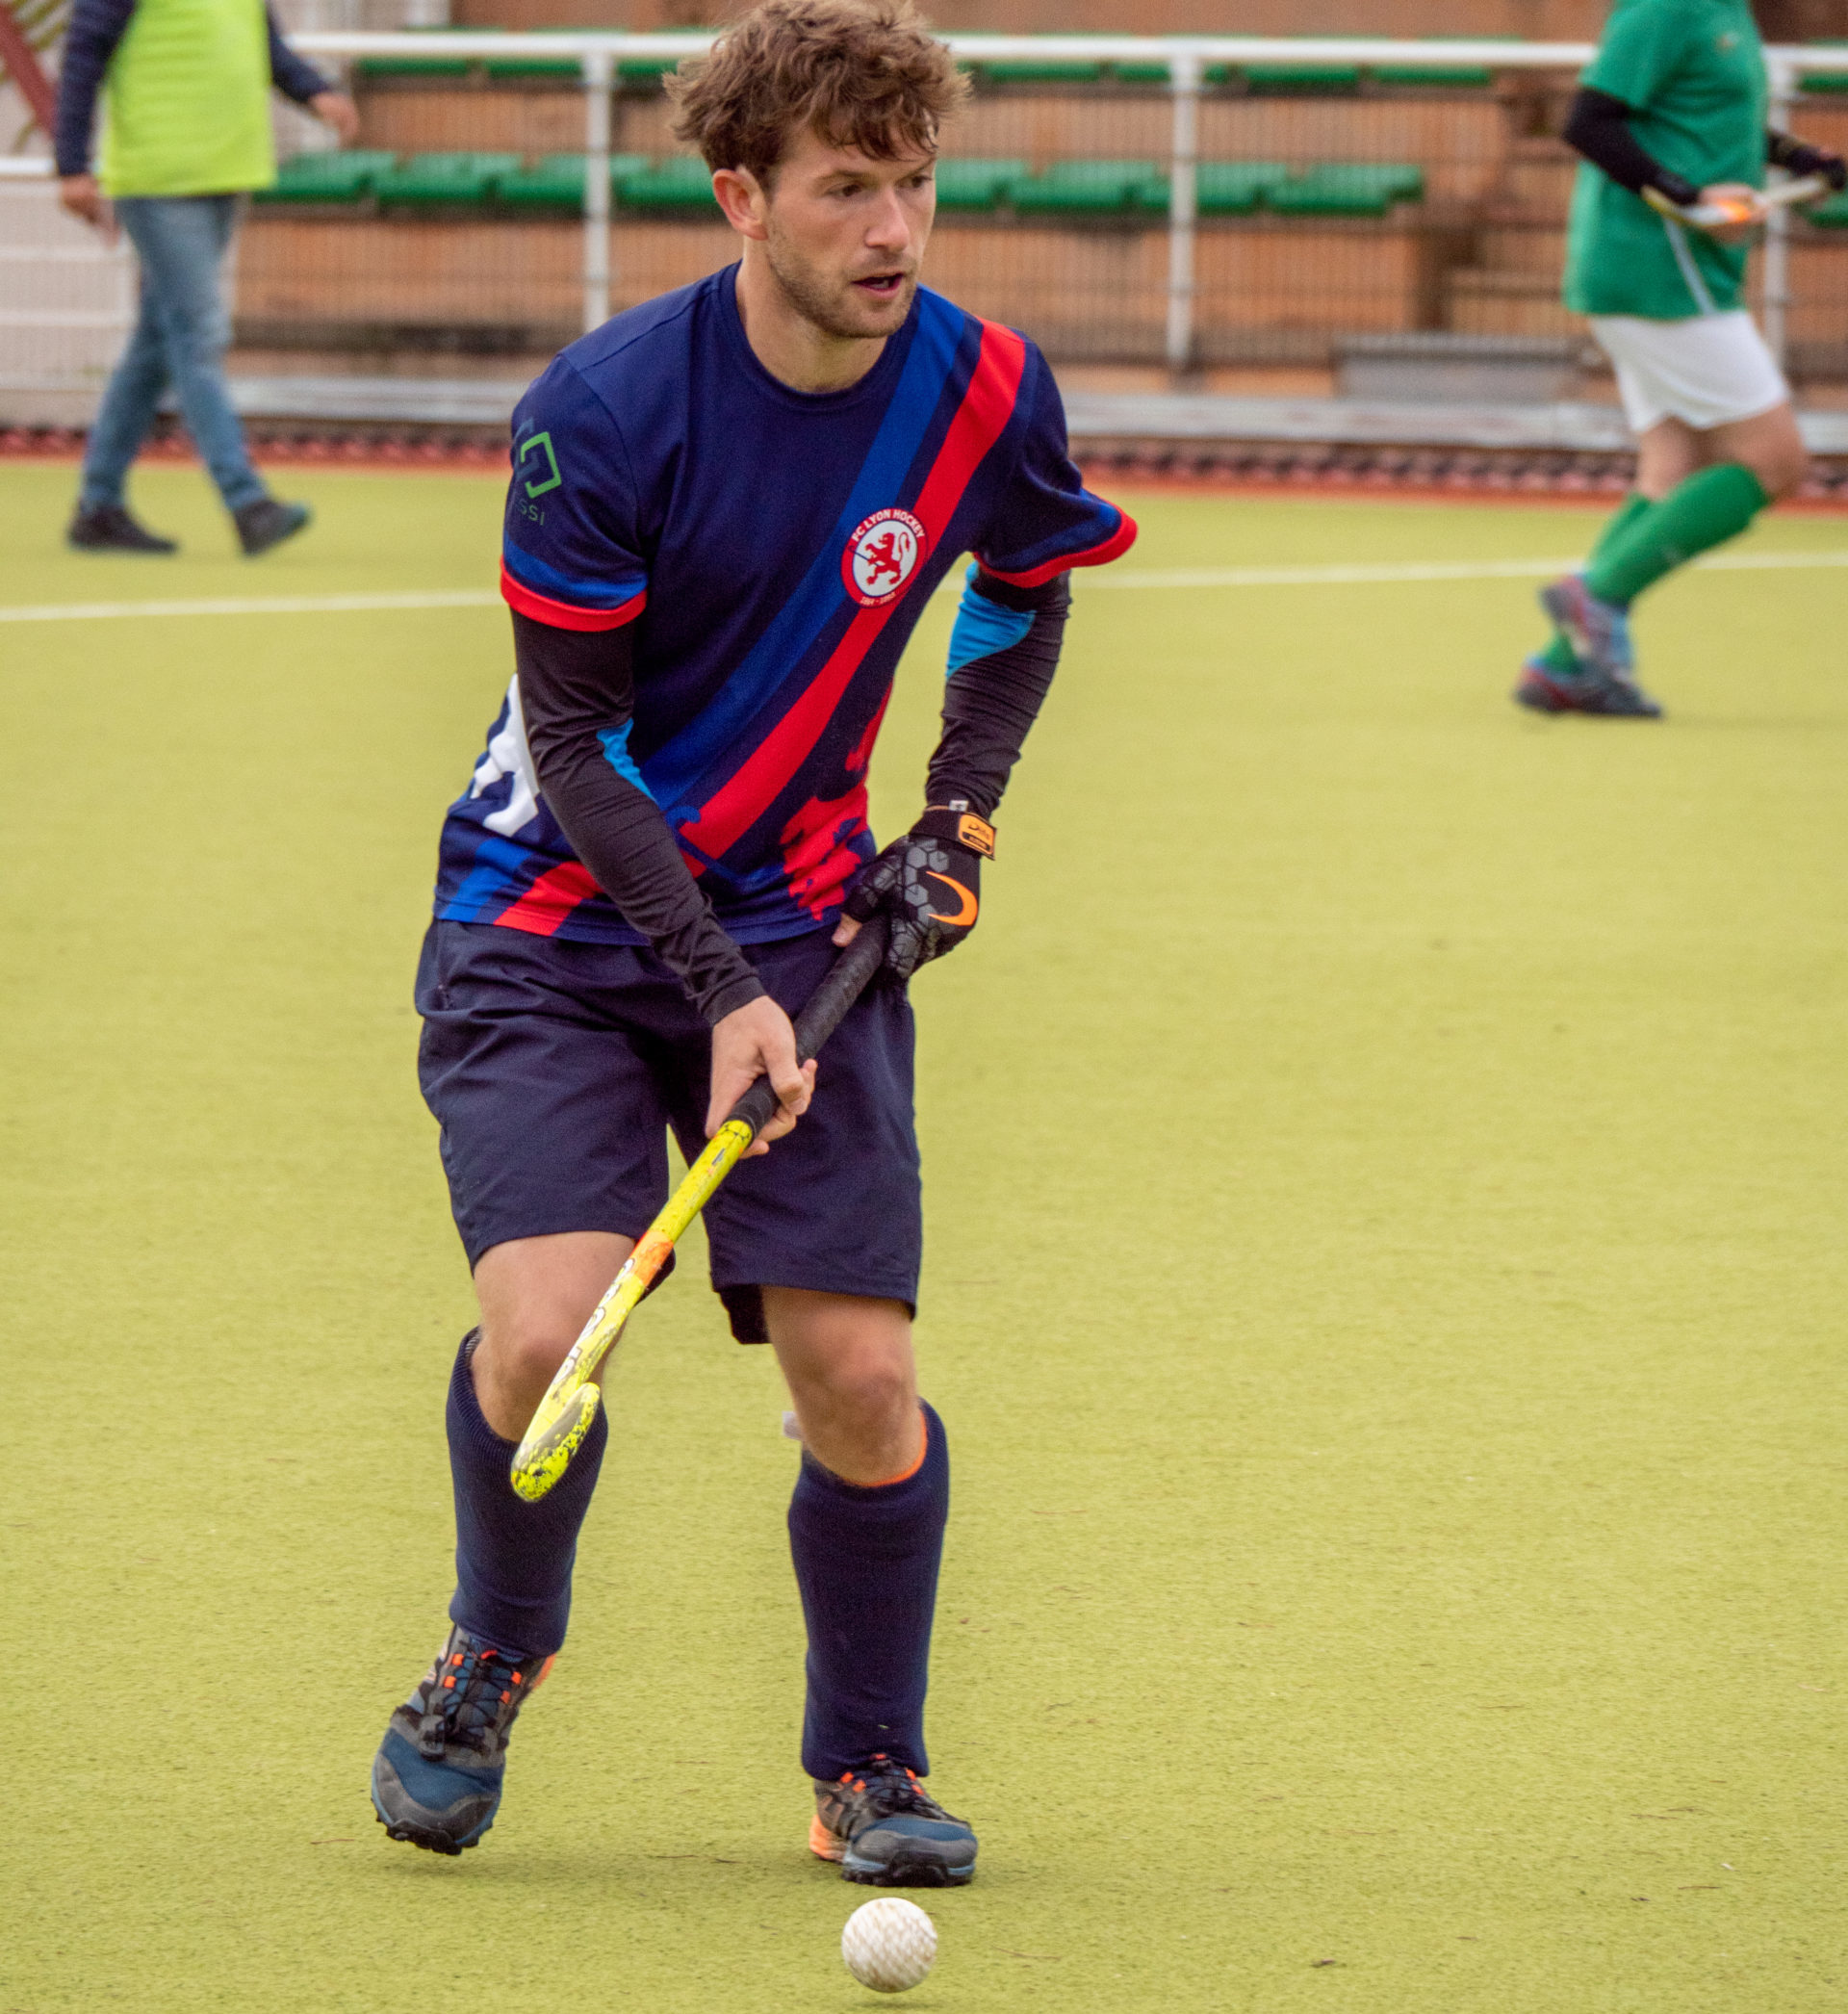 Callum Downs playing hockey for FCL Lyon